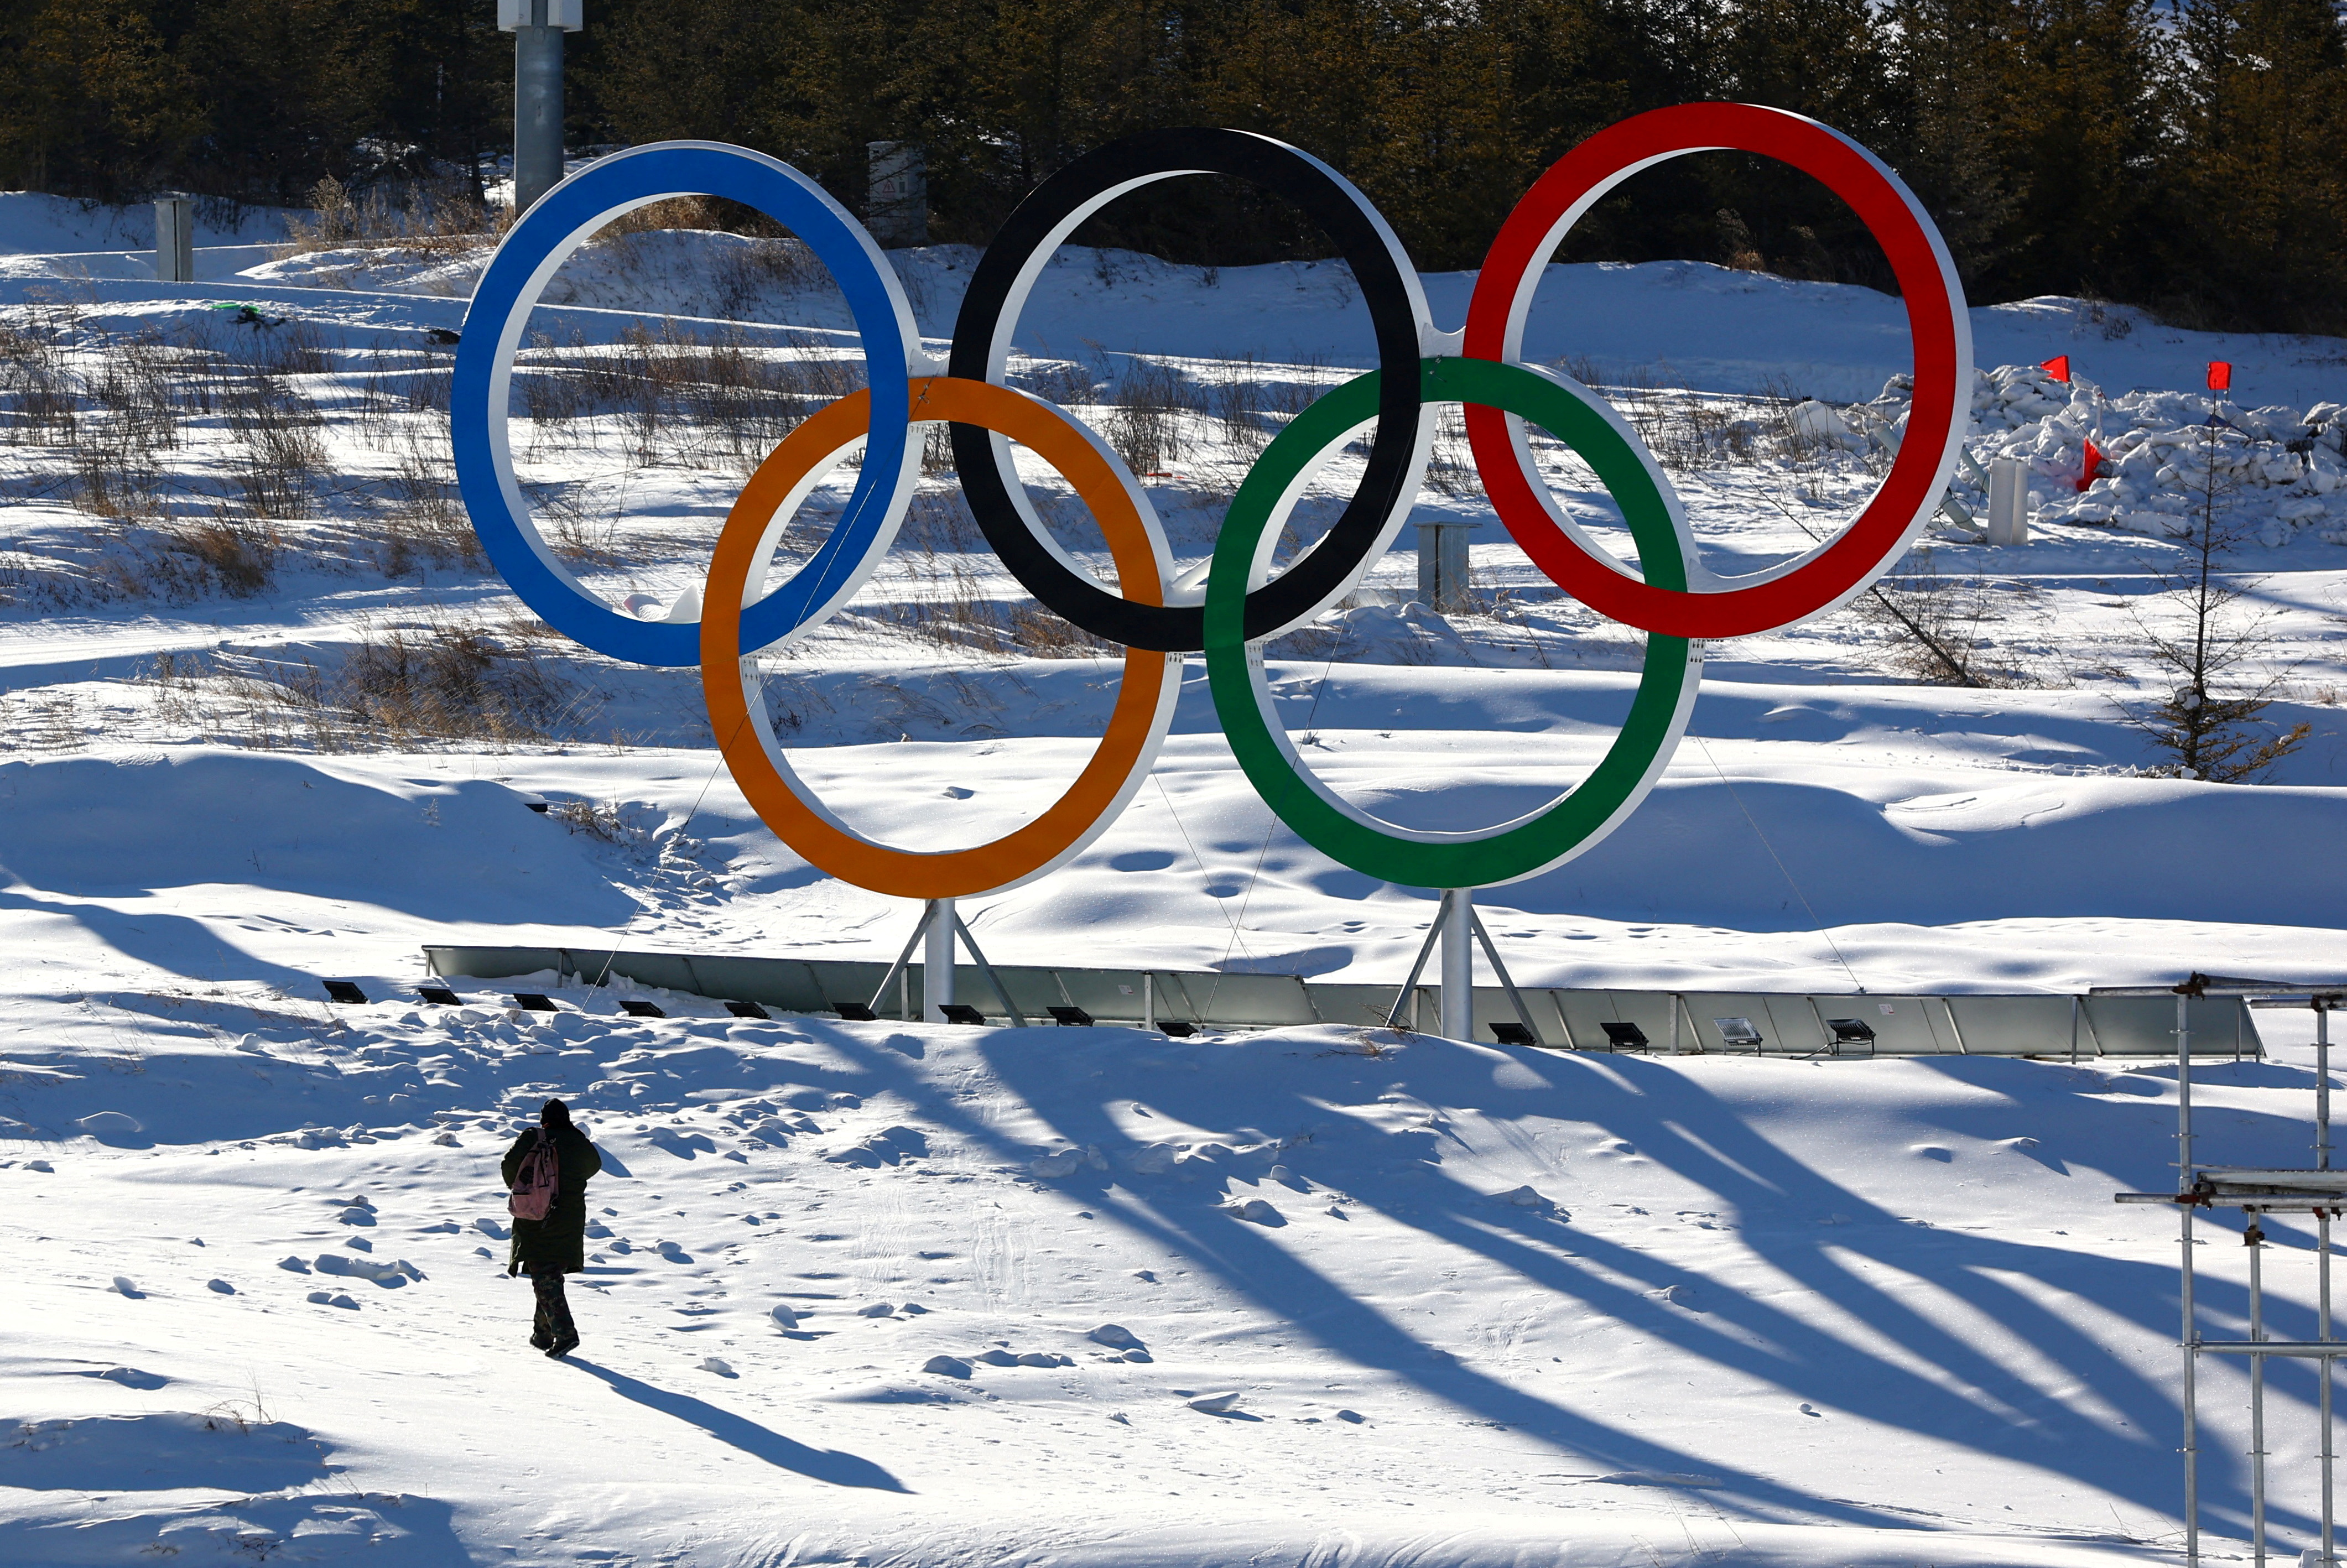 A person walks past the Olympic rings in the Zhangjiakou competition zone ahead of the Beijing 2022 Winter Olympics in Beijing, China January 15, 2022. REUTERS/Pawel Kopczynski